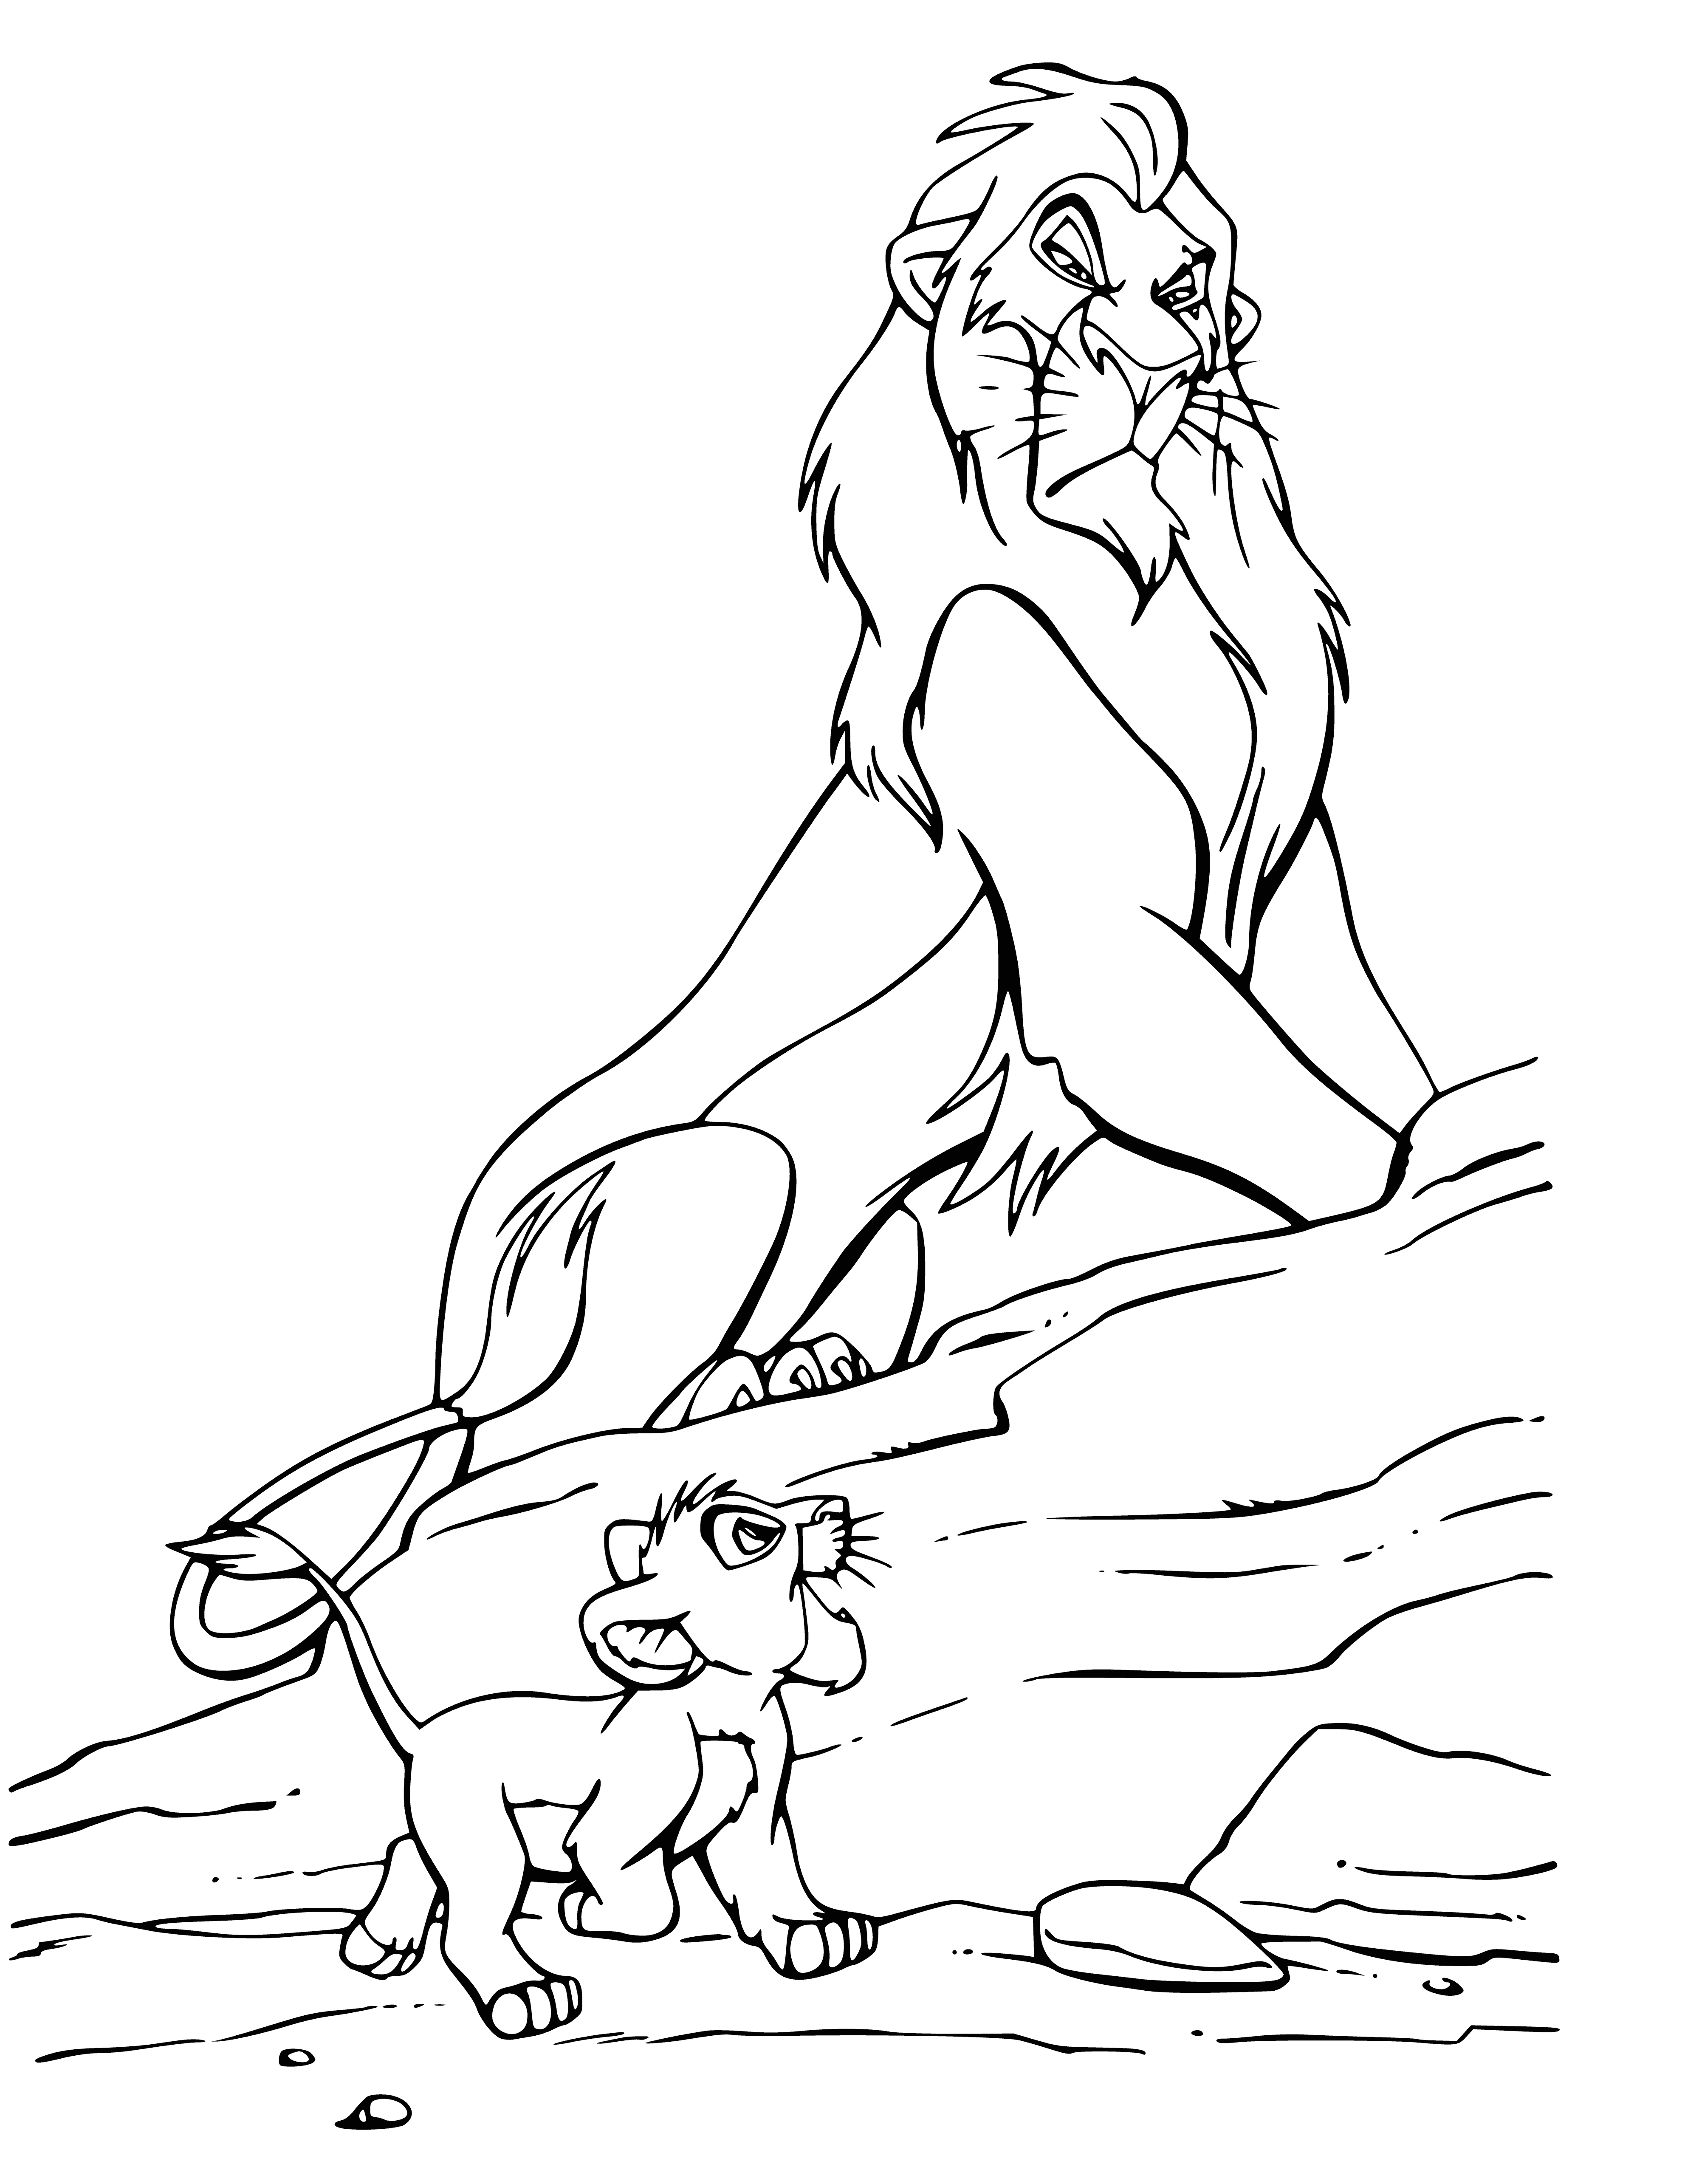 coloring page: Scar, a lion with a scarred face, kills Simba in a dramatic scene.